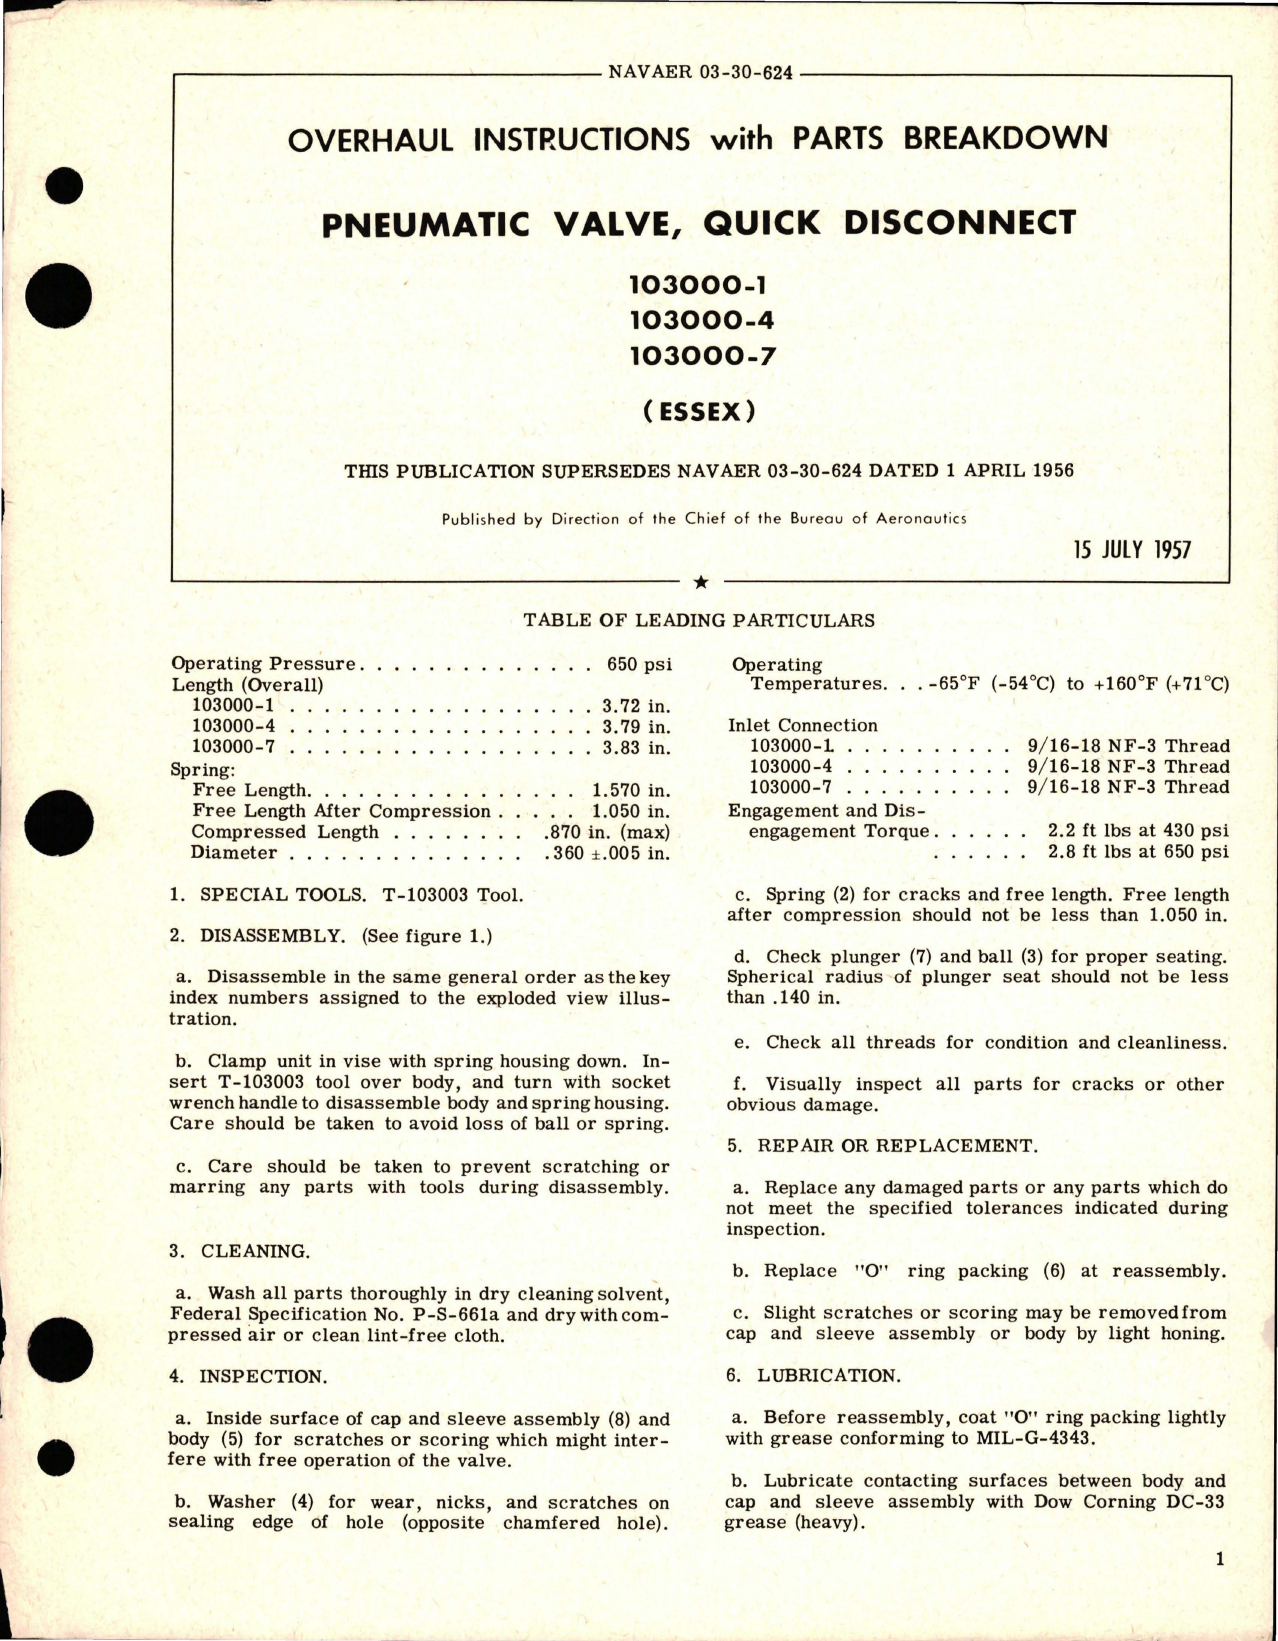 Sample page 1 from AirCorps Library document: Overhaul Instructions with Parts Breakdown for Quick Disconnect Pneumatic Valve